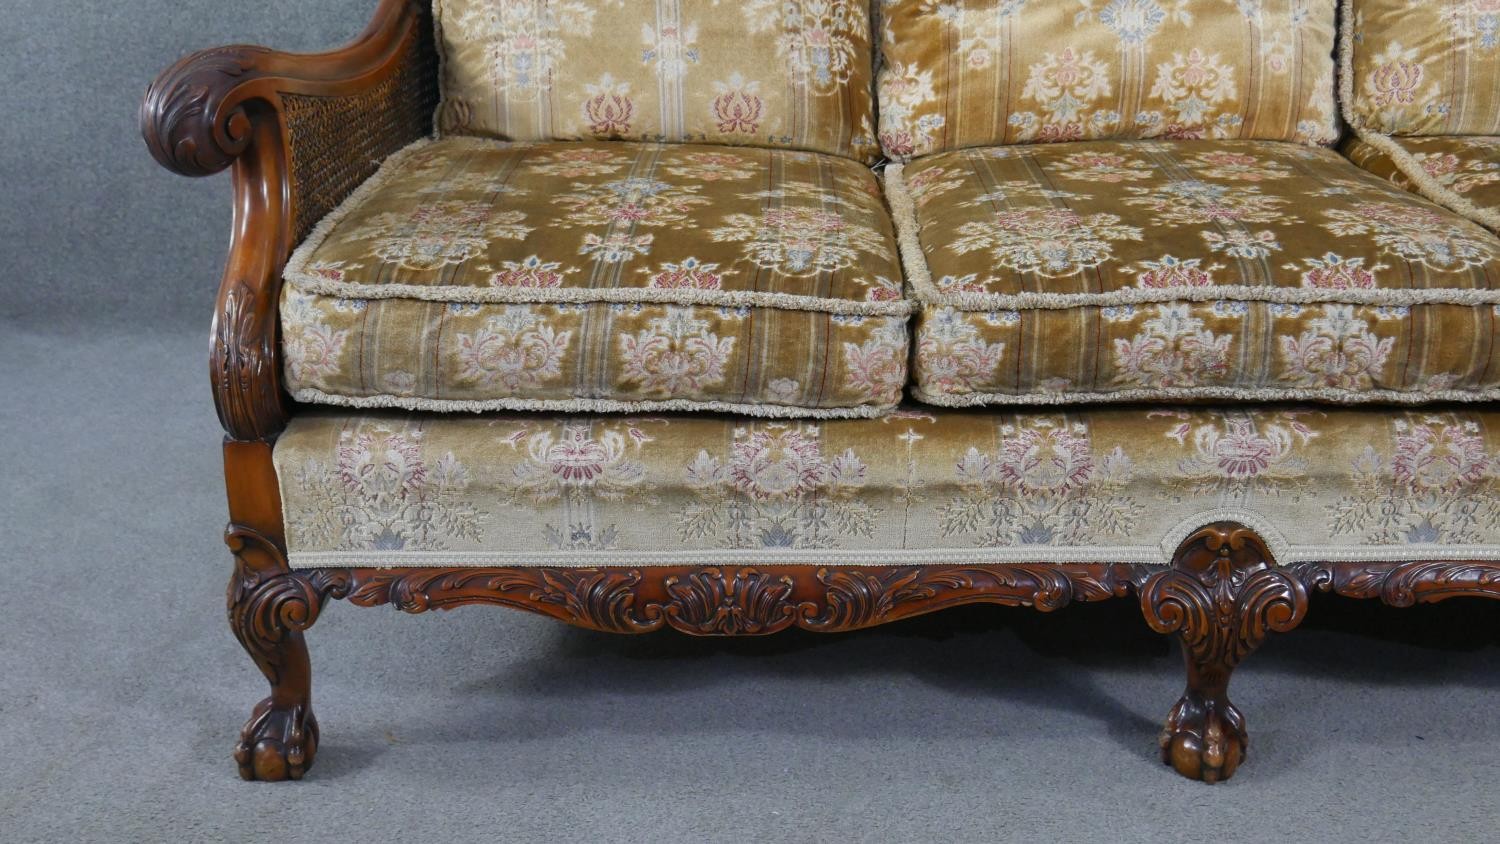 A mid century carved walnut three seater bergere sofa with double caned sides in cut floral - Image 3 of 7